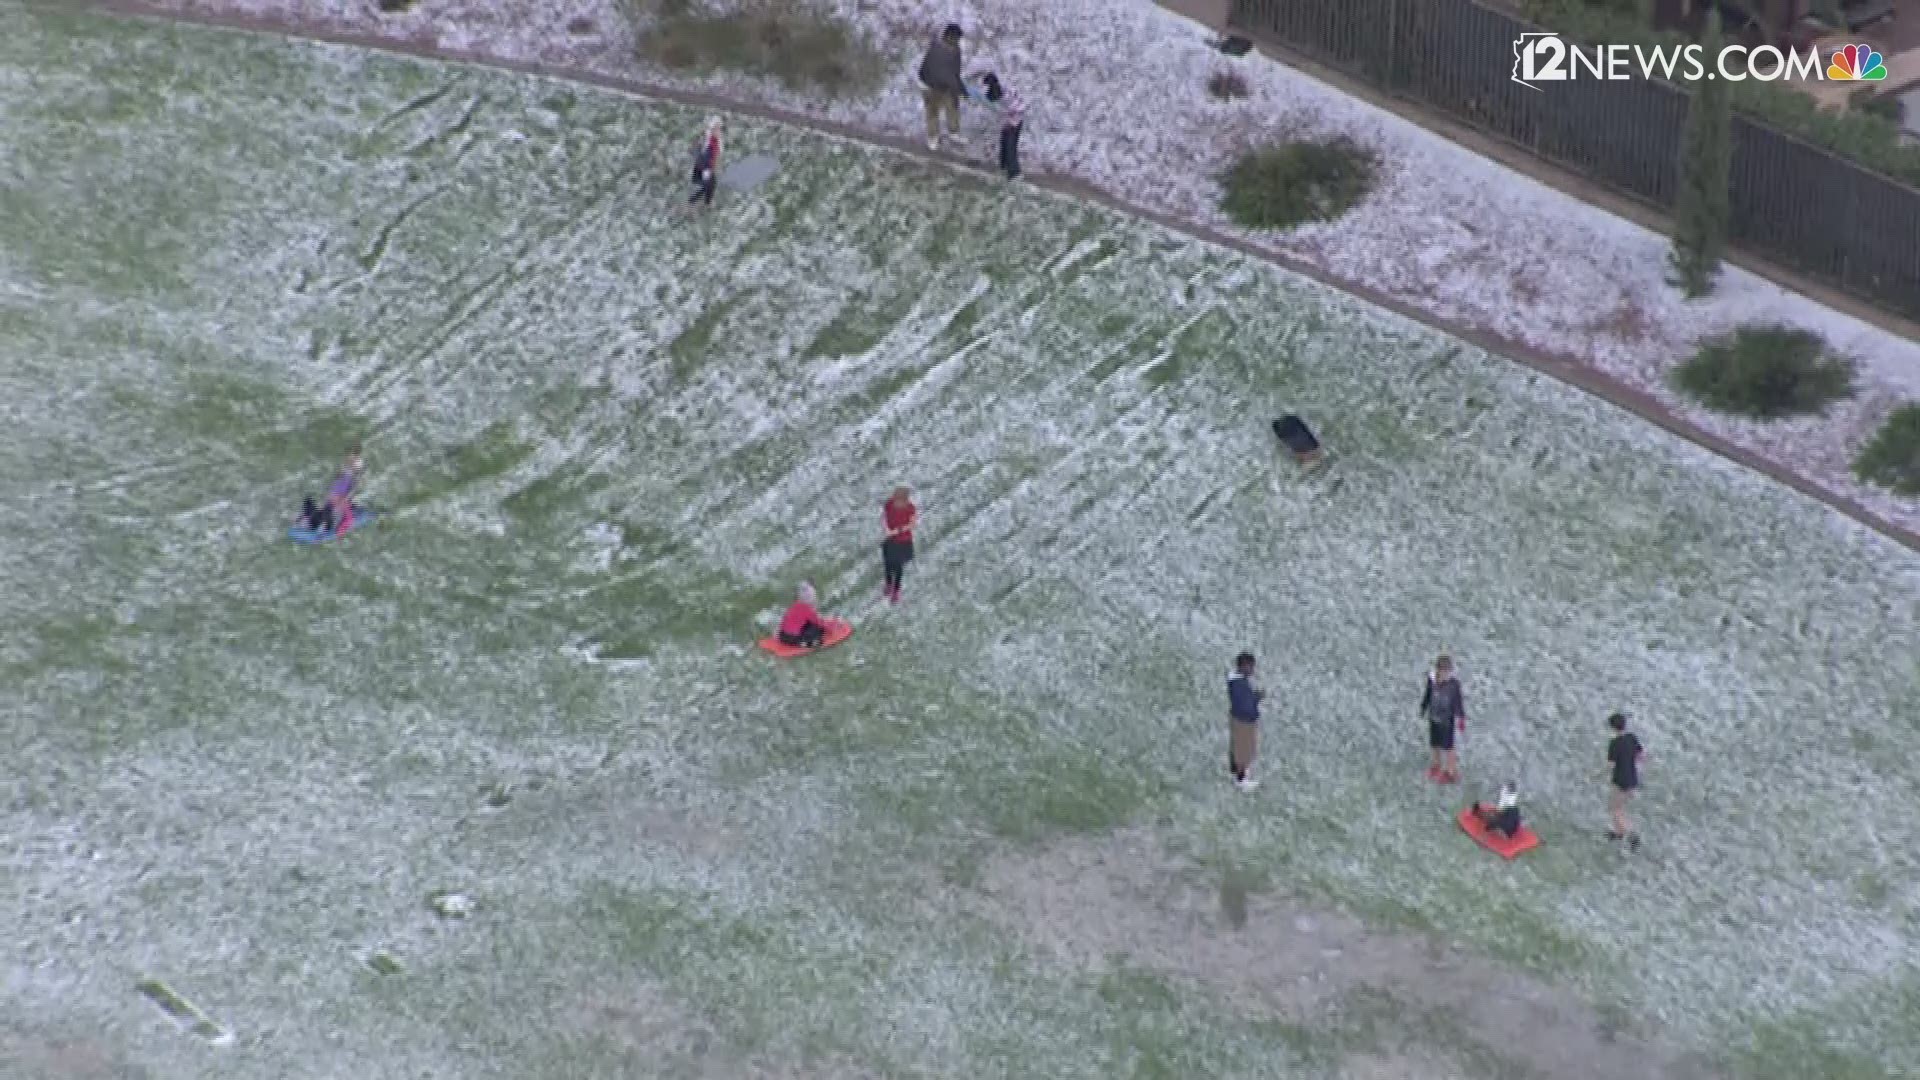 It may be November and that may be hail, but it is beginning to look a lot like Christmas! Especially cause some kids in Goodyear went sledding through the hail!